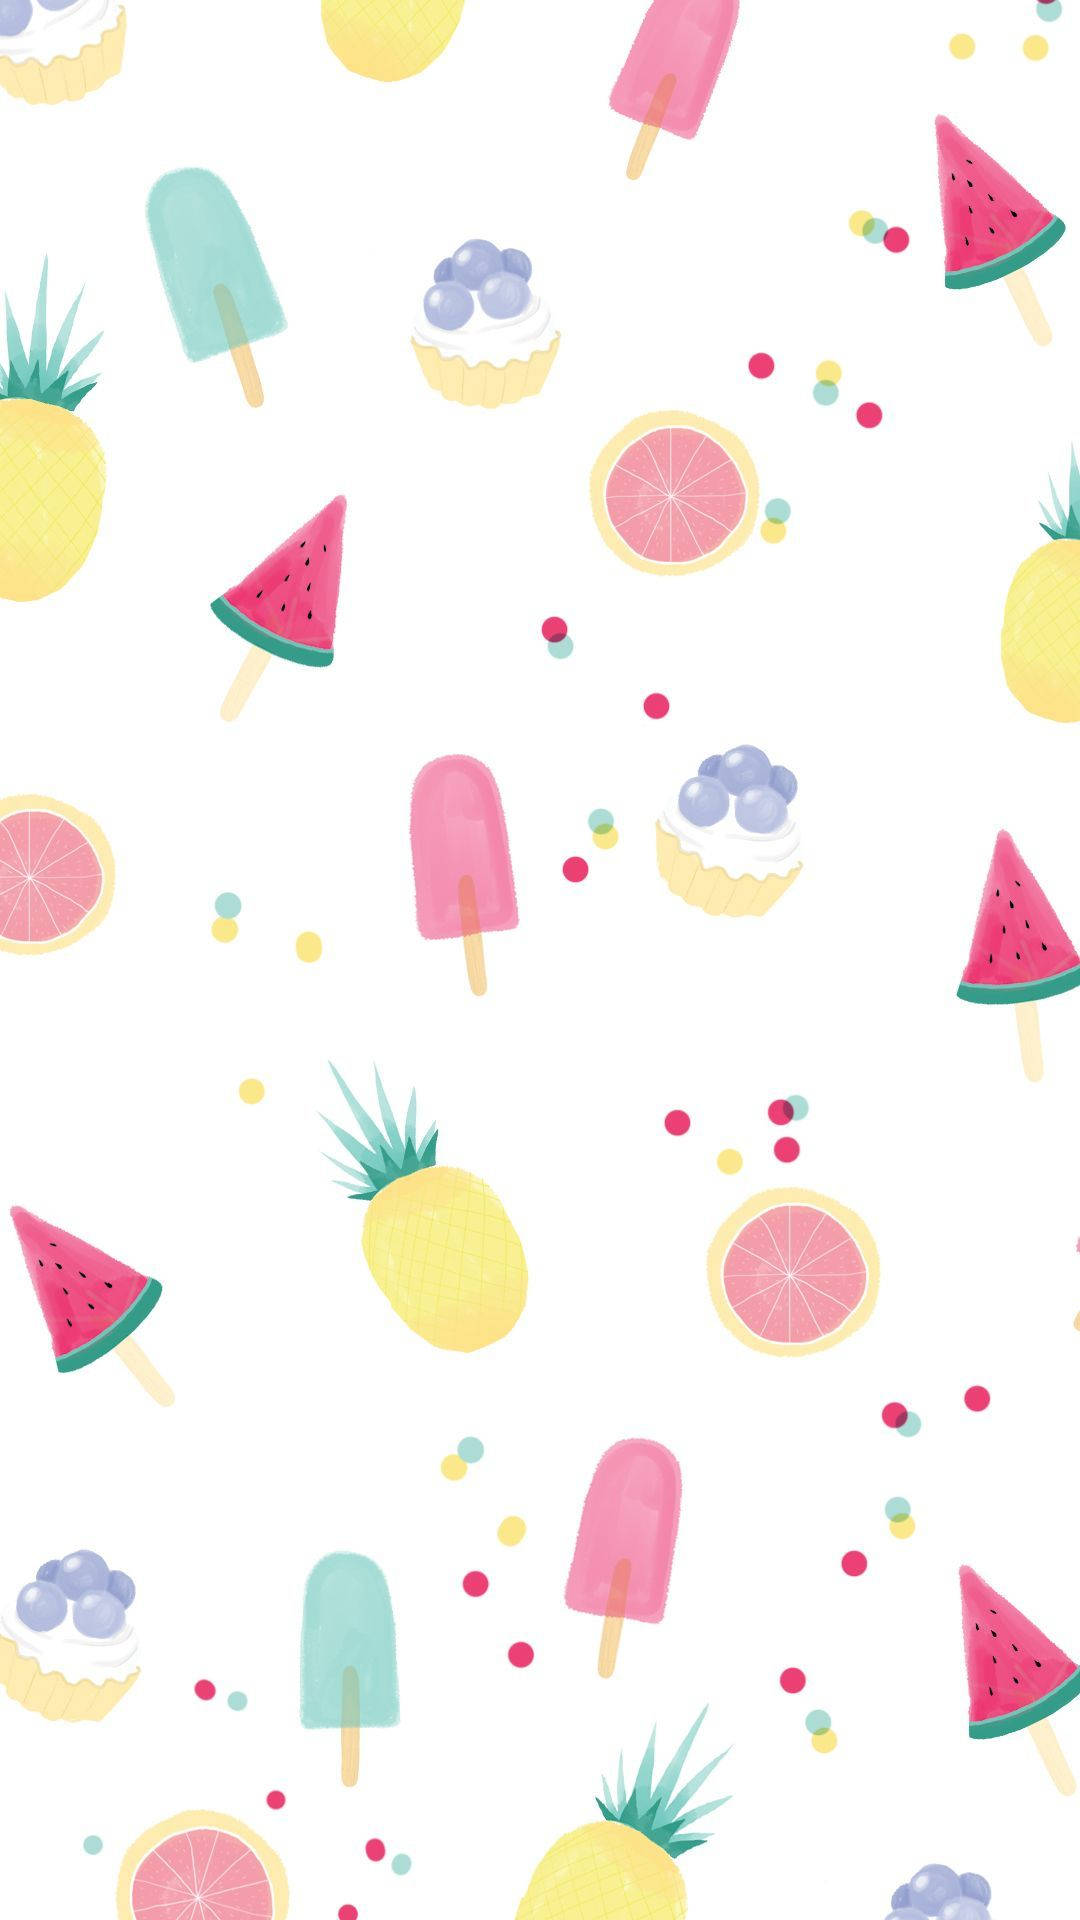 Popsicle Background Images  Free Photos PNG Stickers Wallpapers   Backgrounds  rawpixel